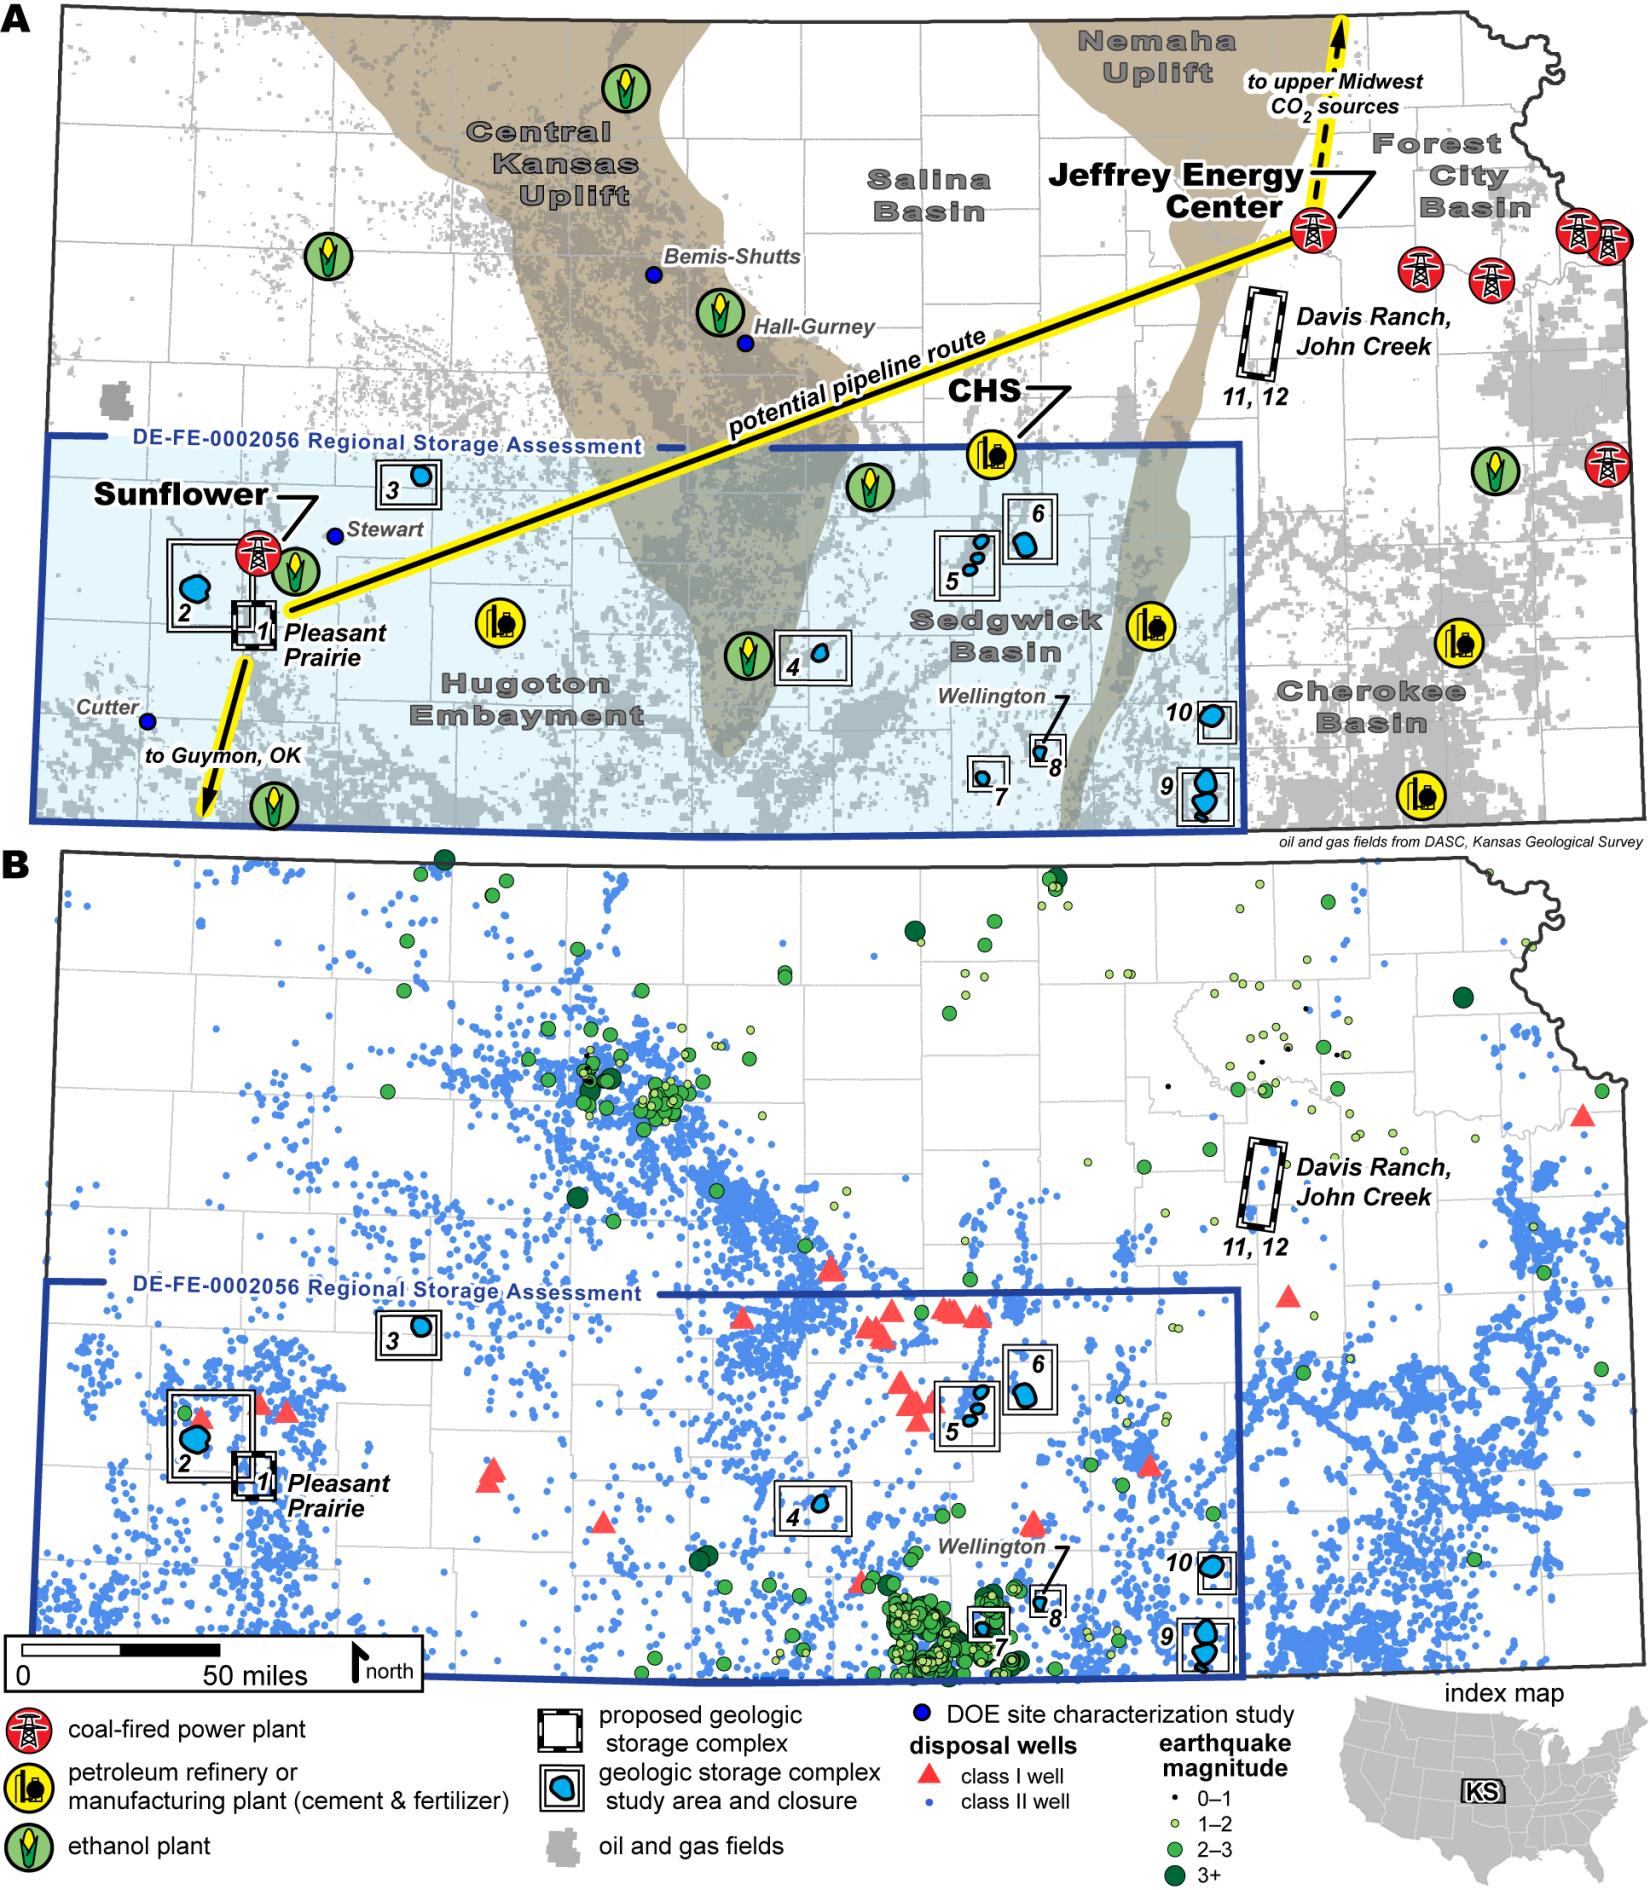 Two maps showing possible pipeline route and earthquakes/disposal sites.